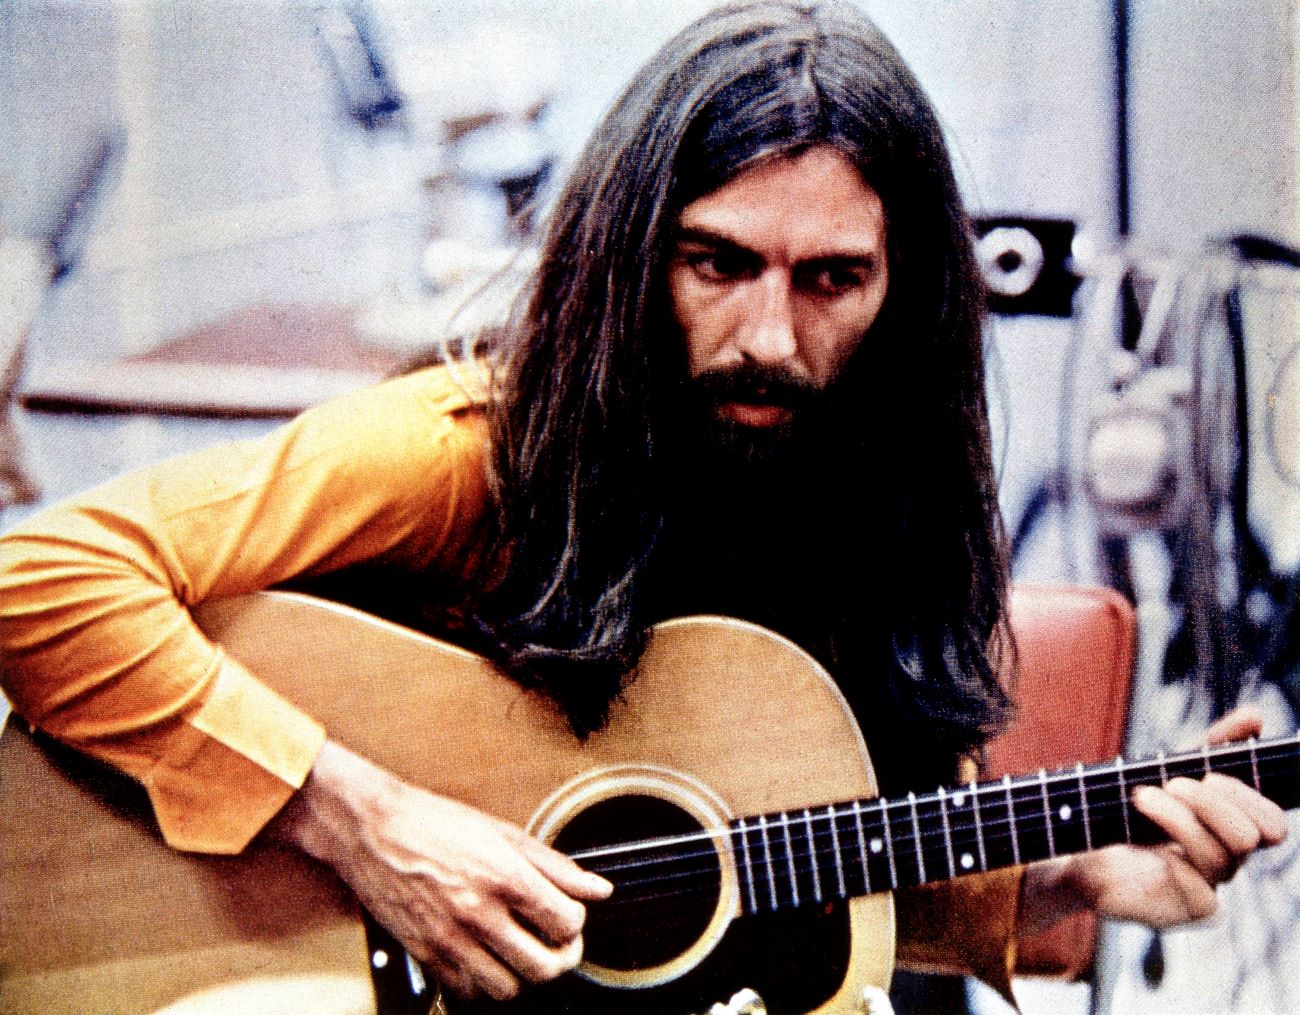 George Harrison Was a ‘Worrier’: ‘He Could Be Quite Jittery’